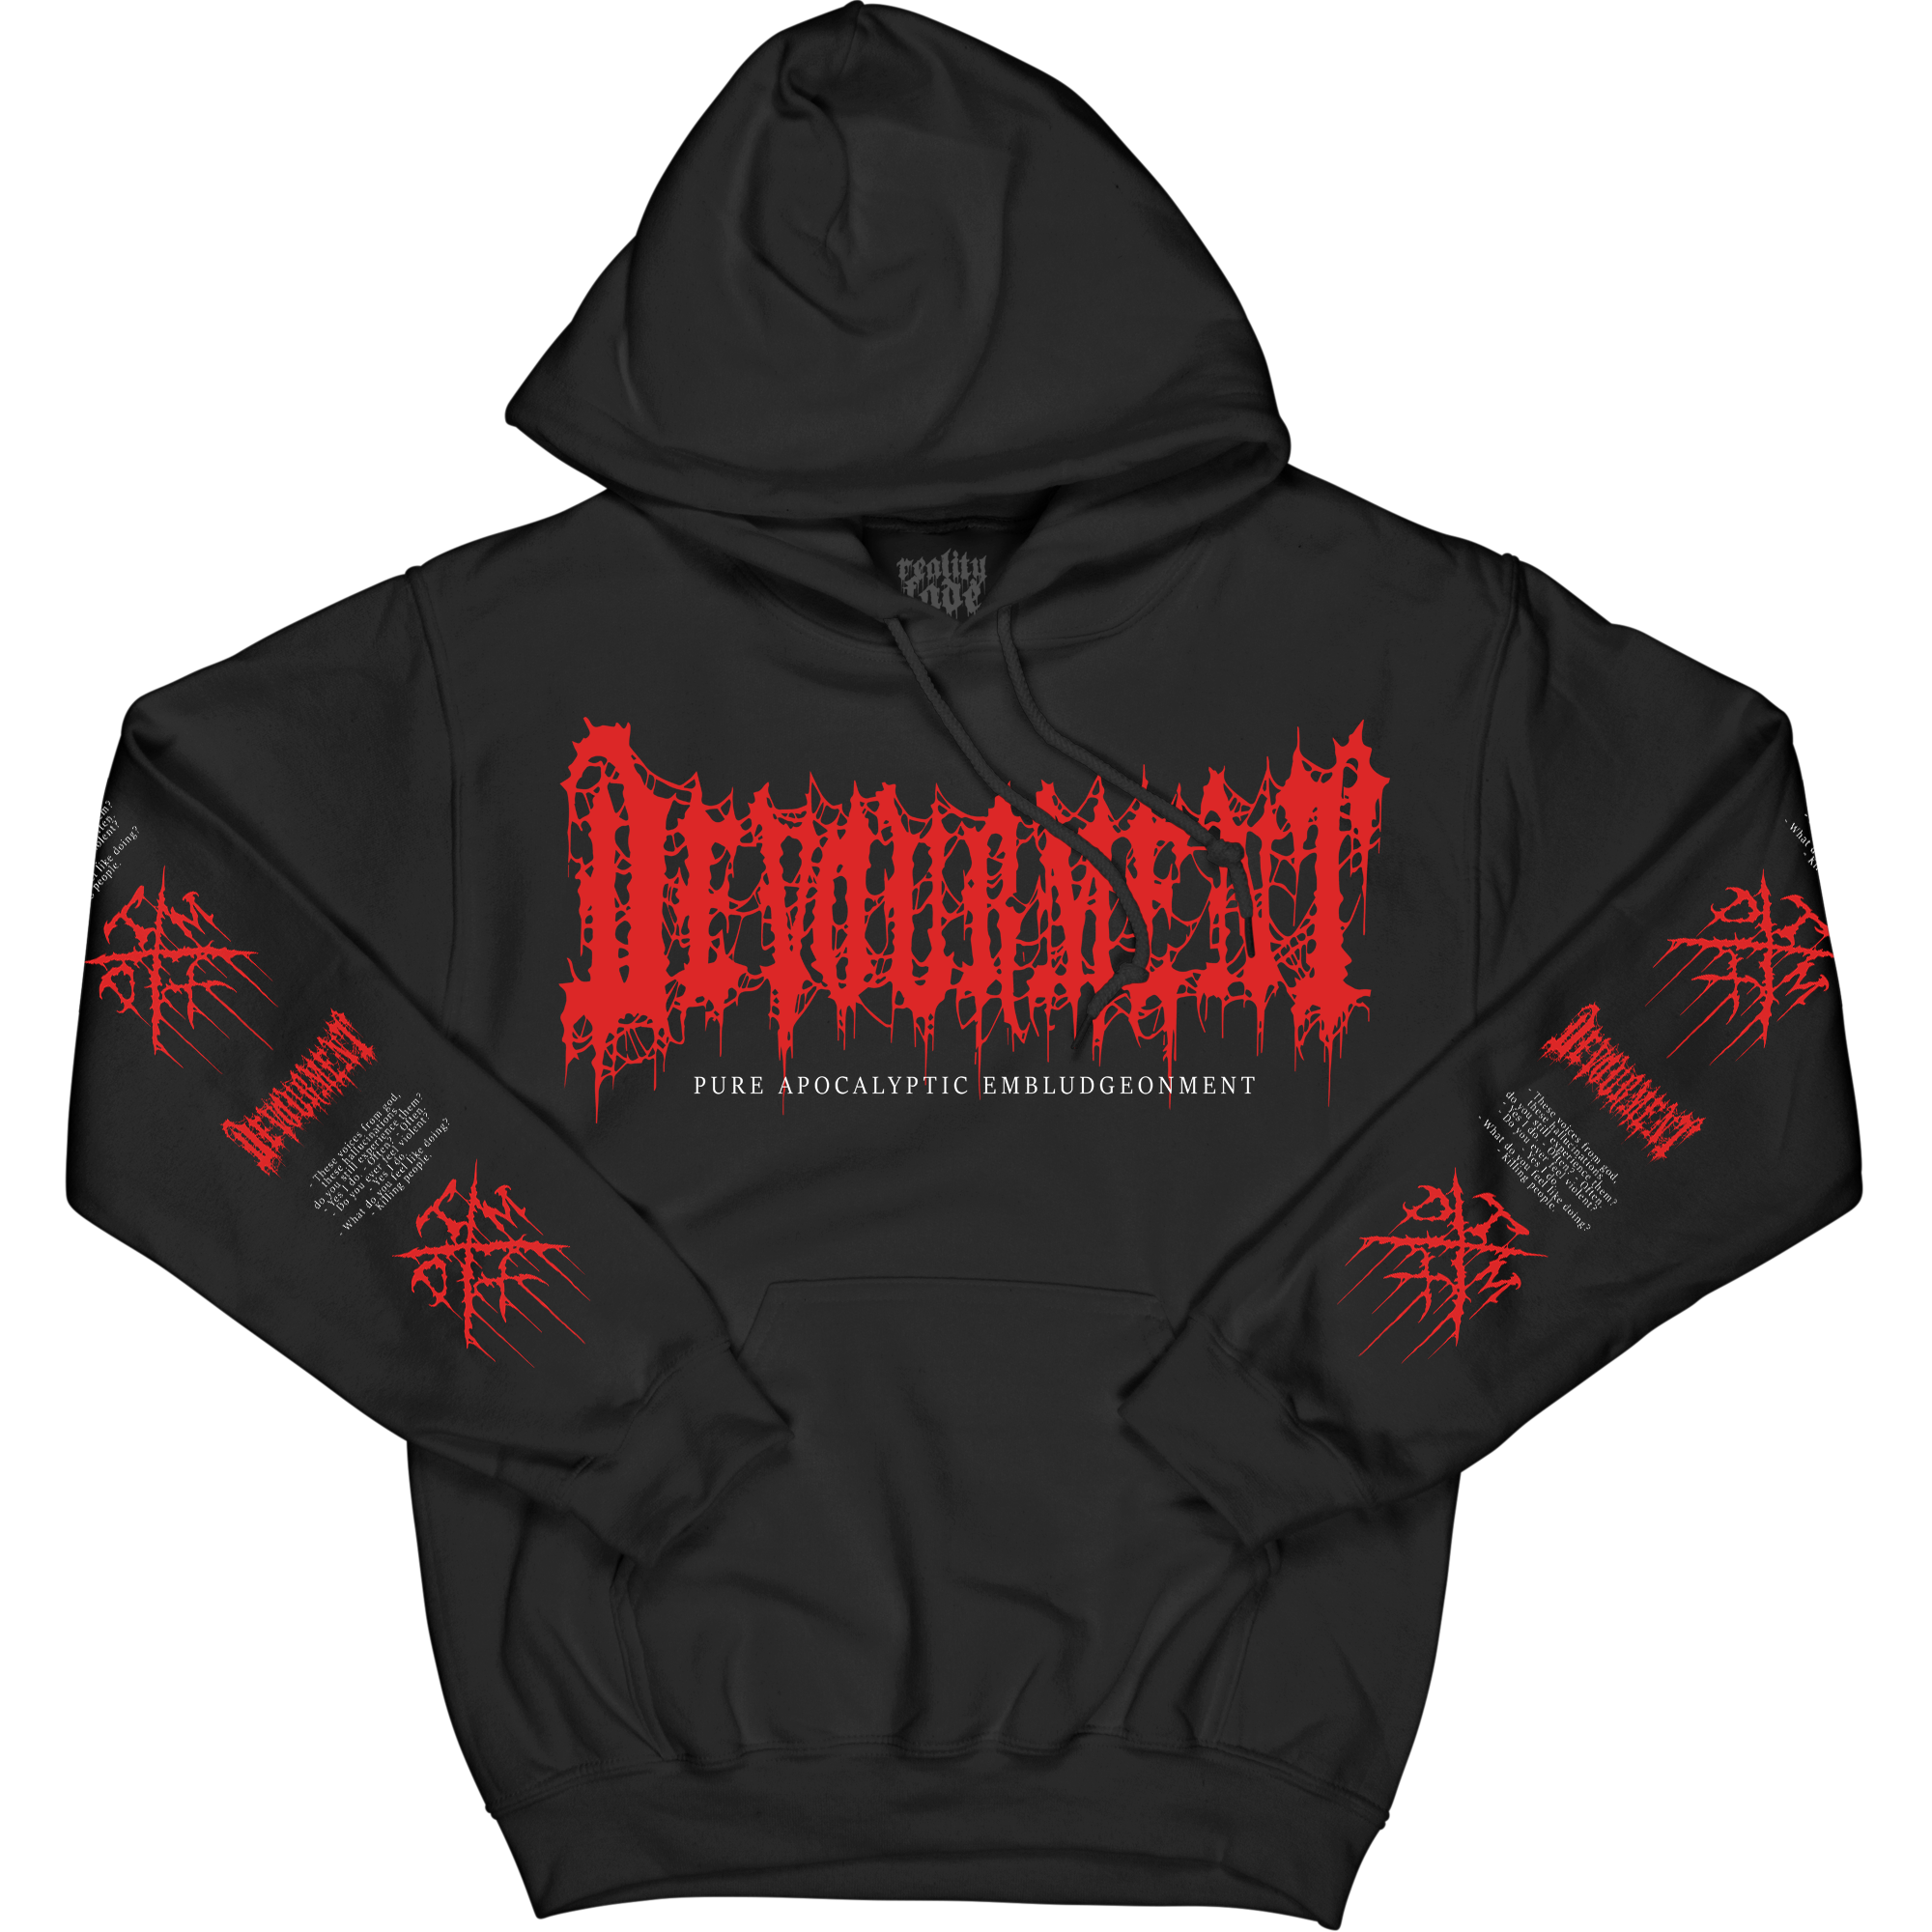 Devourment Pure Apocalyptic Embludgeonment Hoodie Pre Order Reality Fade Merch 